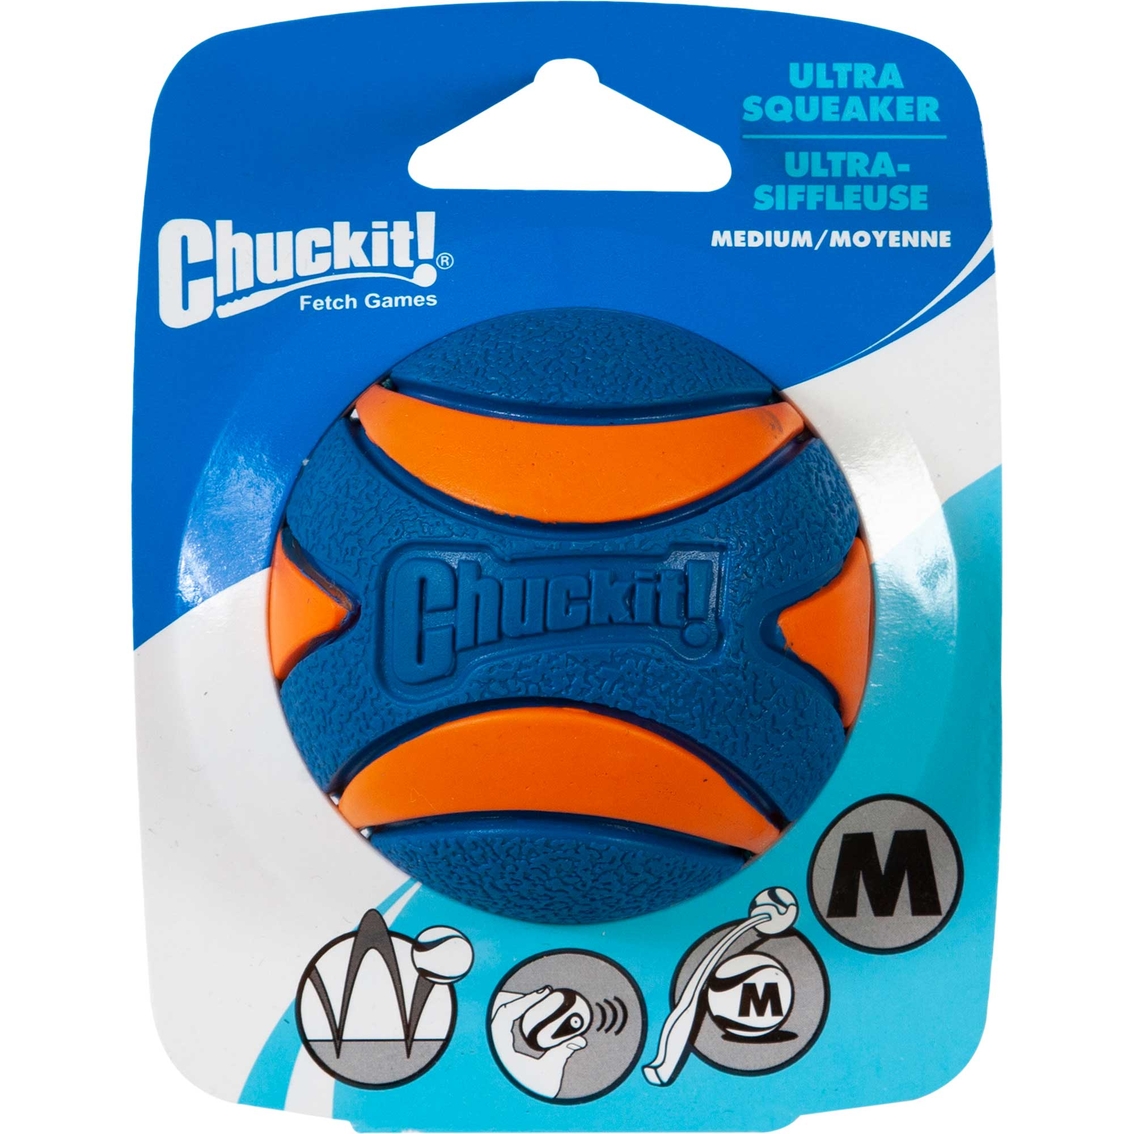 Petmate Chuckit! Ultra Squeaker Ball Large Dog Toy - Image 3 of 5